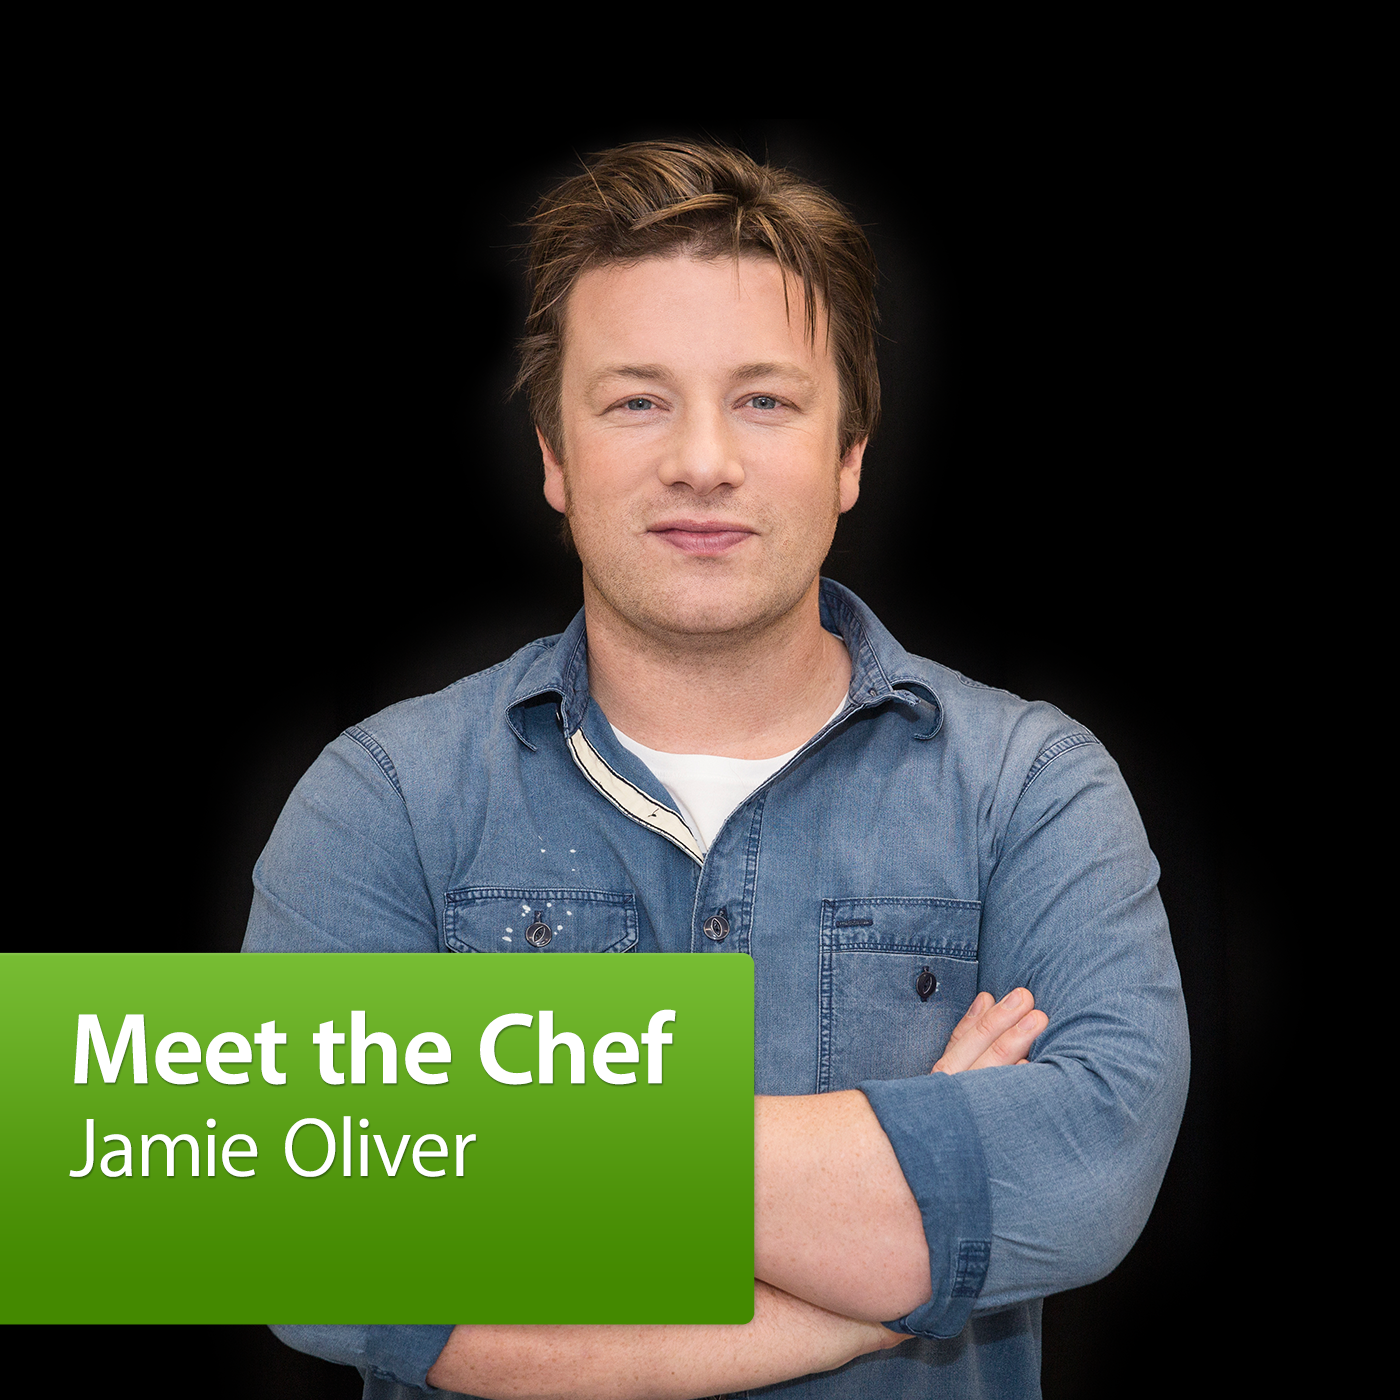 Jamie Oliver: Meet the Chef